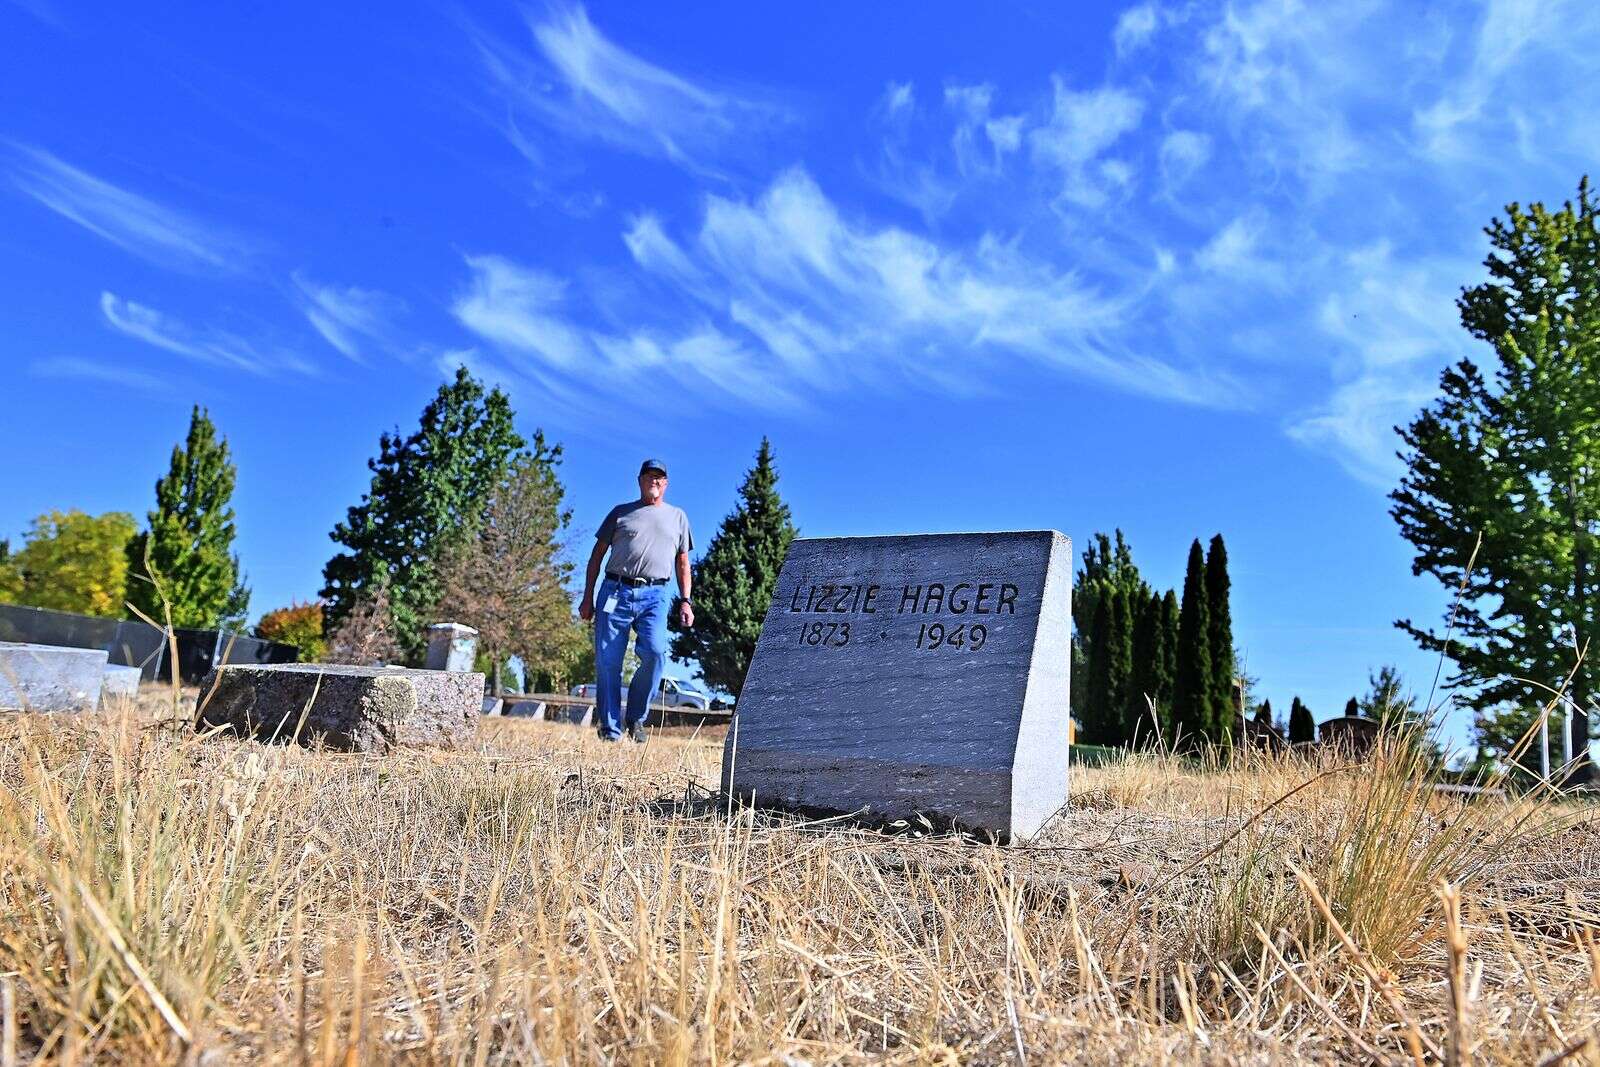 Helping hands needed at historical Central Point Cemetery – Medford News, Weather, Sports, Breaking News